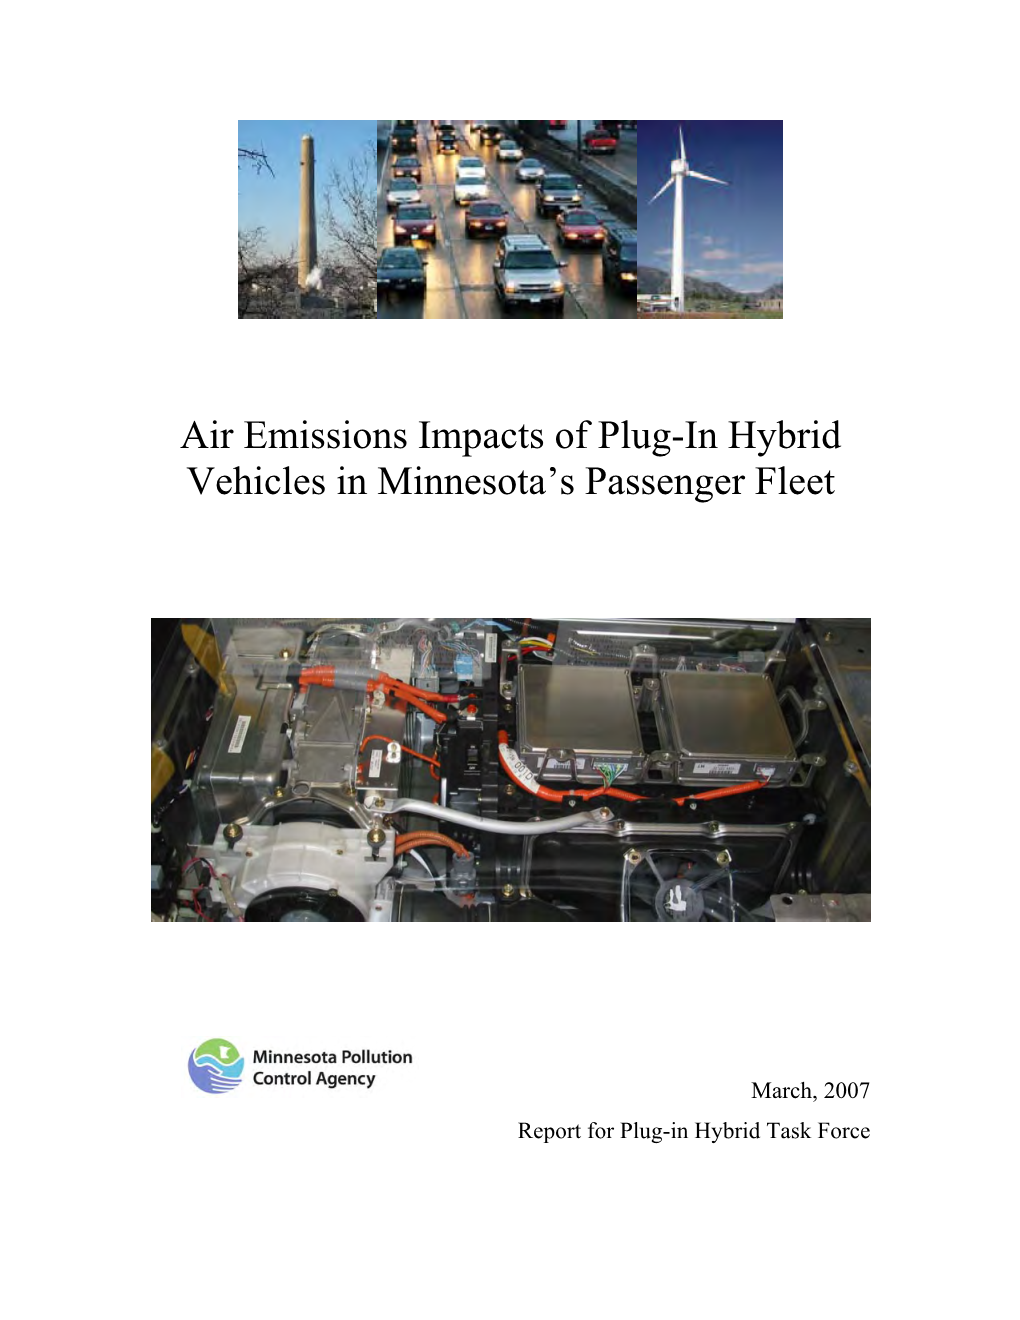 Air Emissions Impacts of Plug-In Hybrid Vehicles in Minnesota's